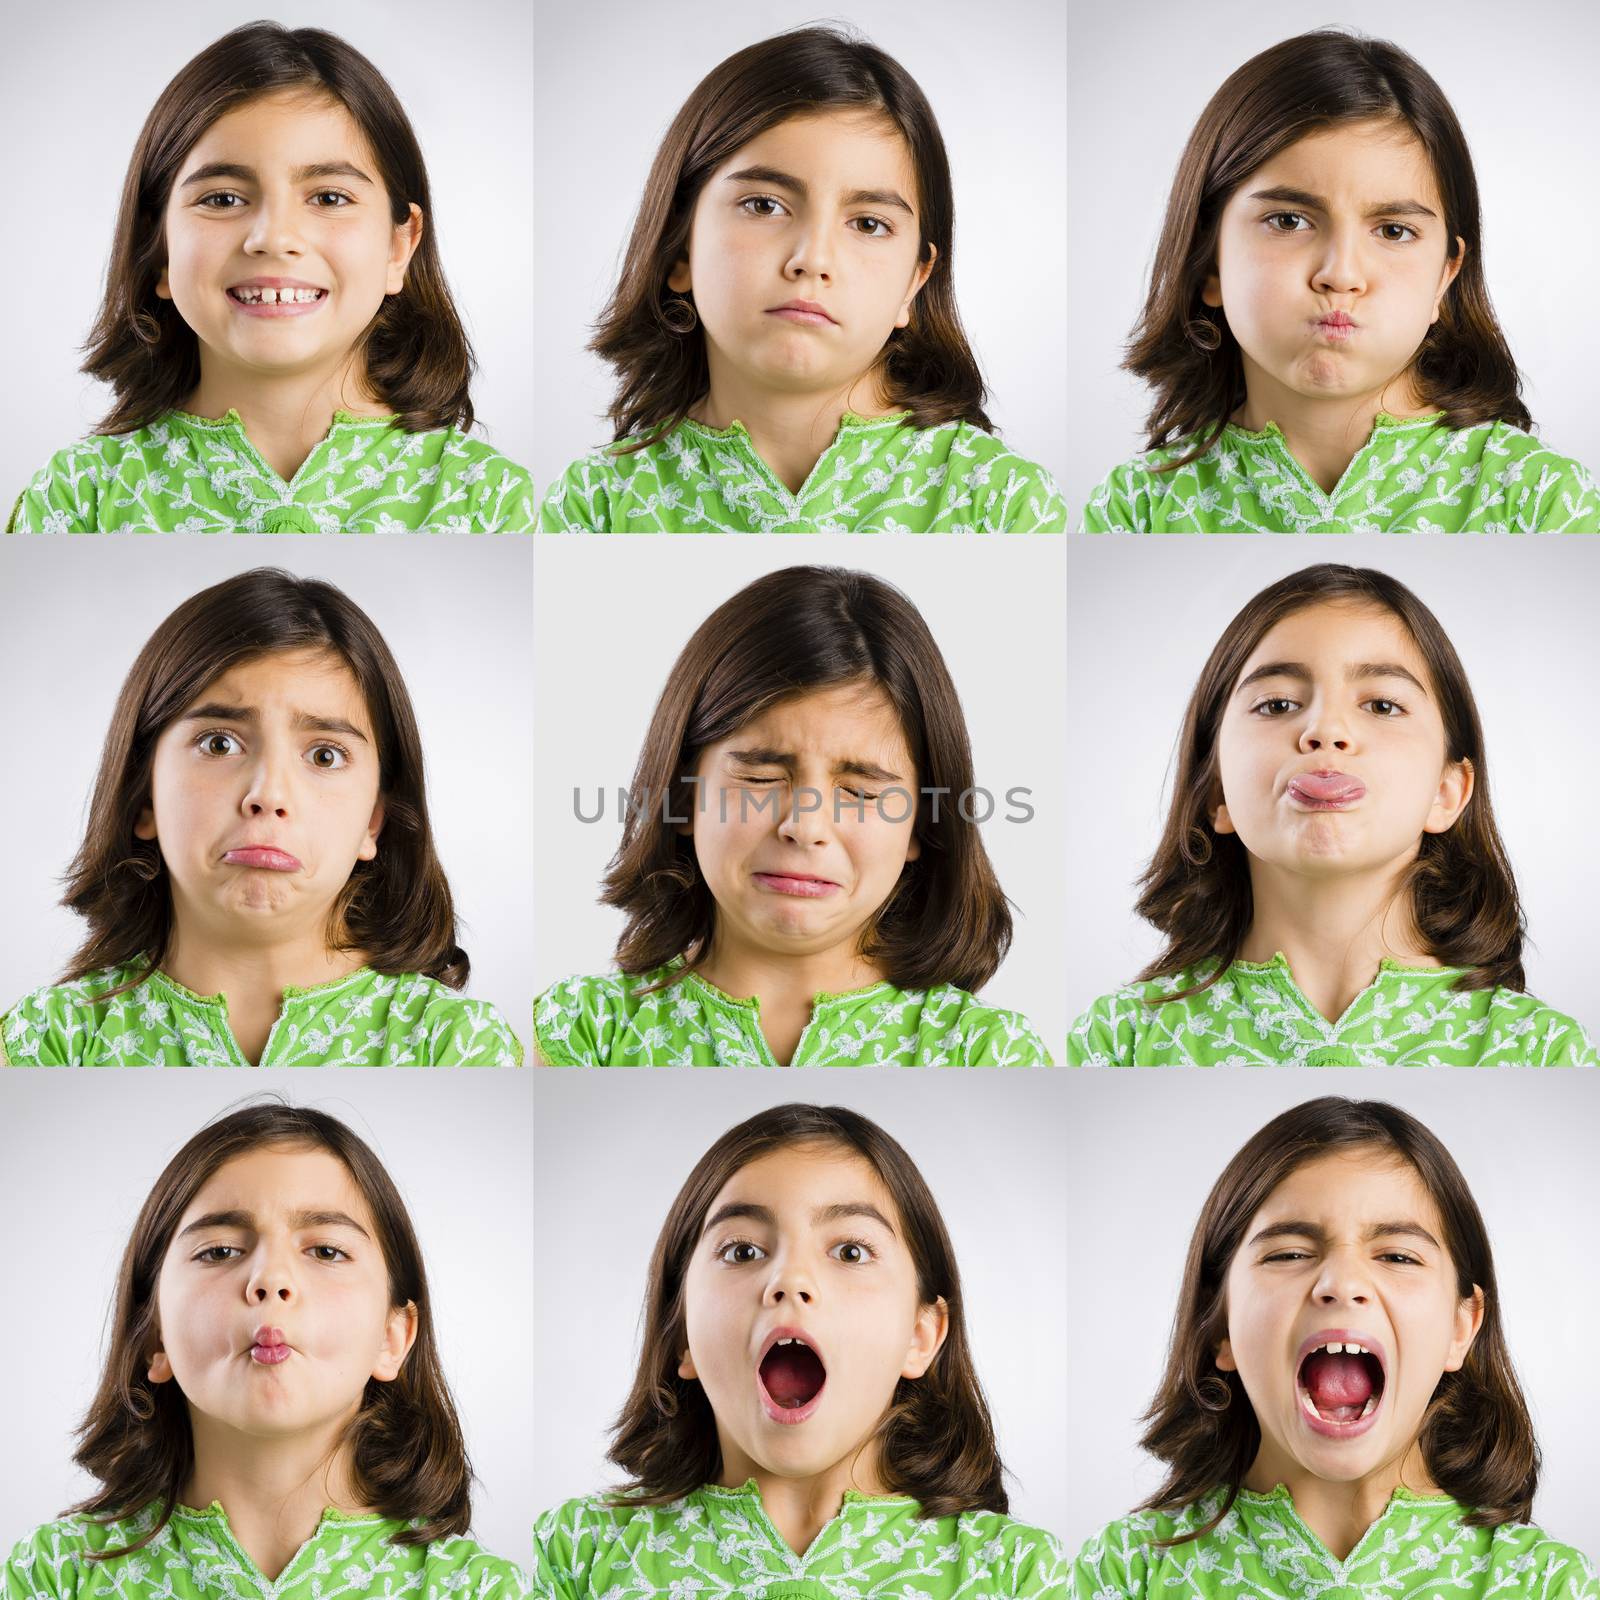 Multiple portraits of the same little girl making diferent expressions